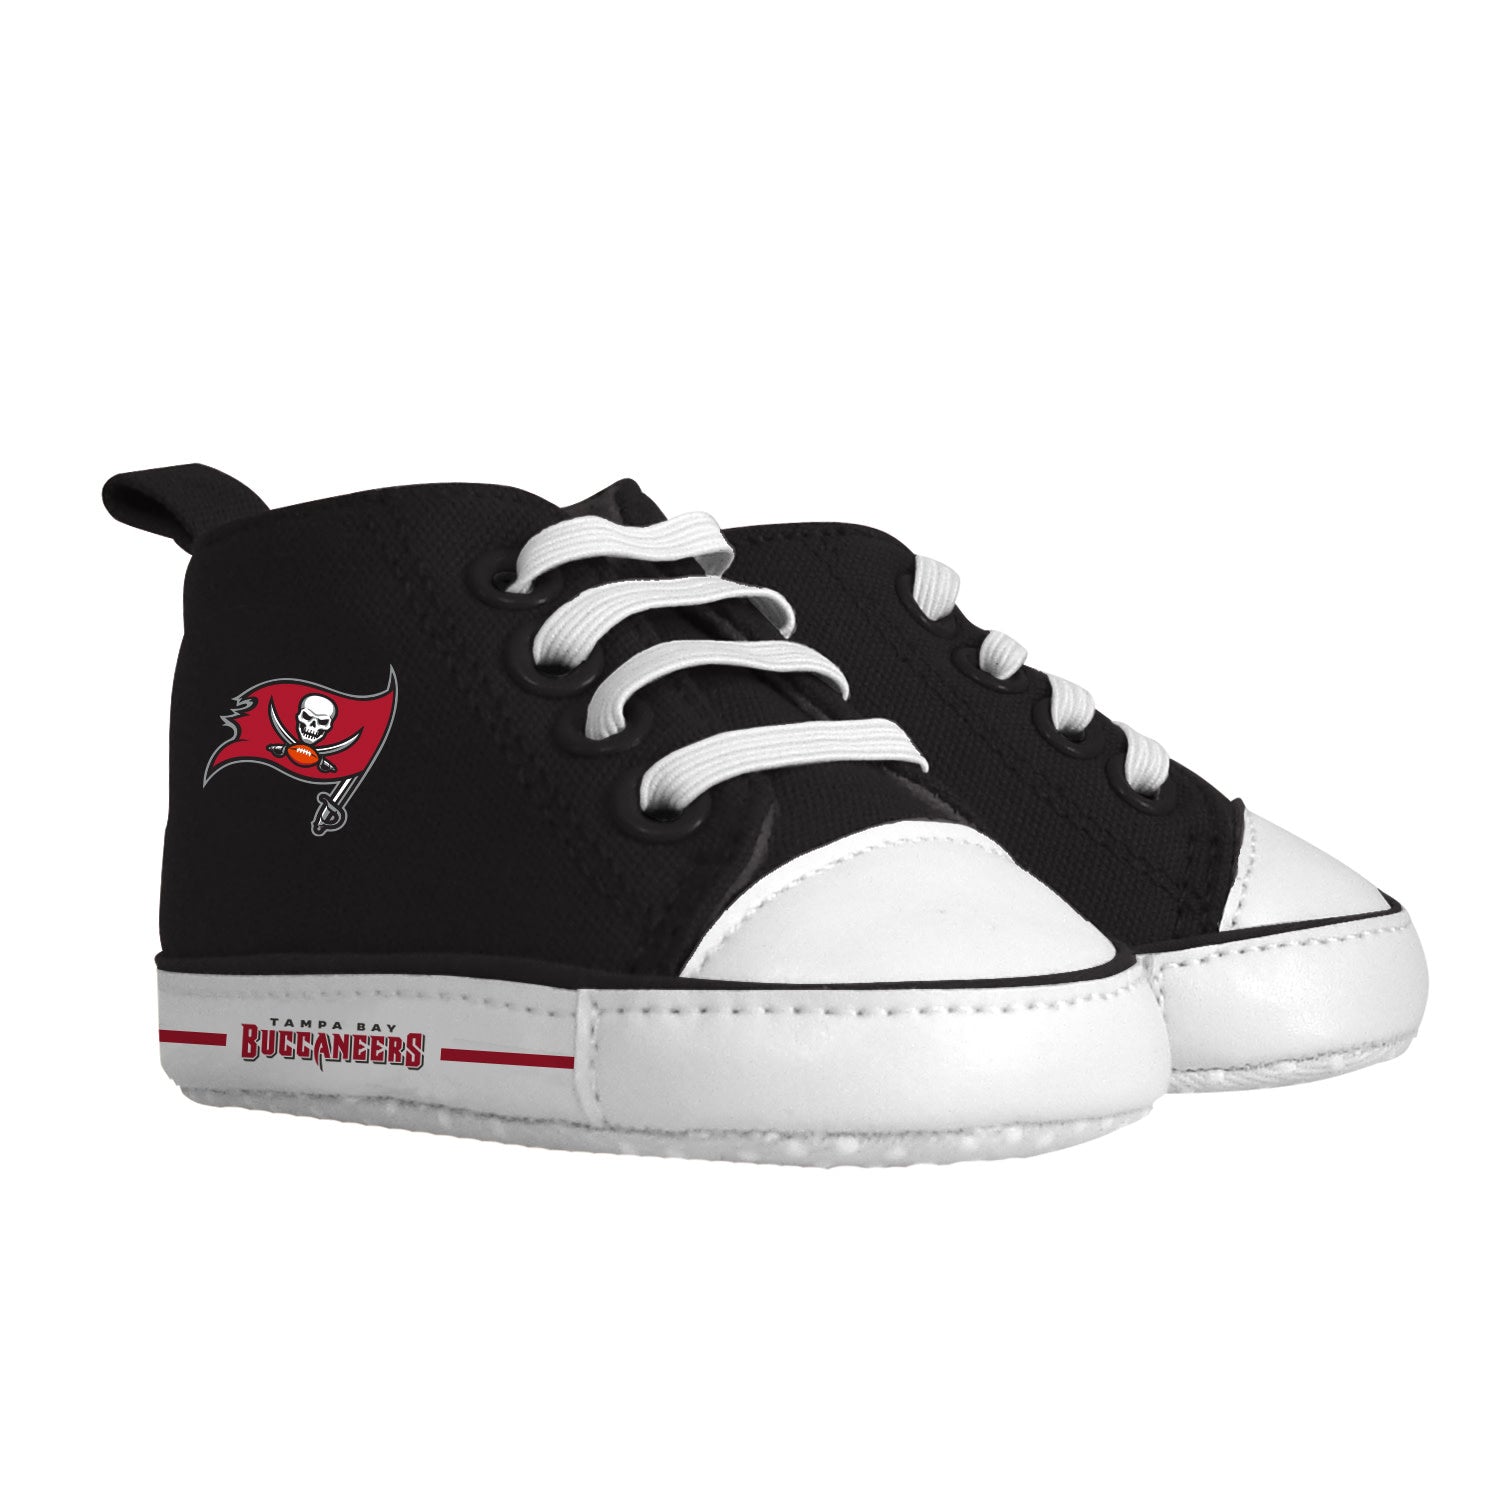 Tampa Bay Buccaneers Baby Shoes